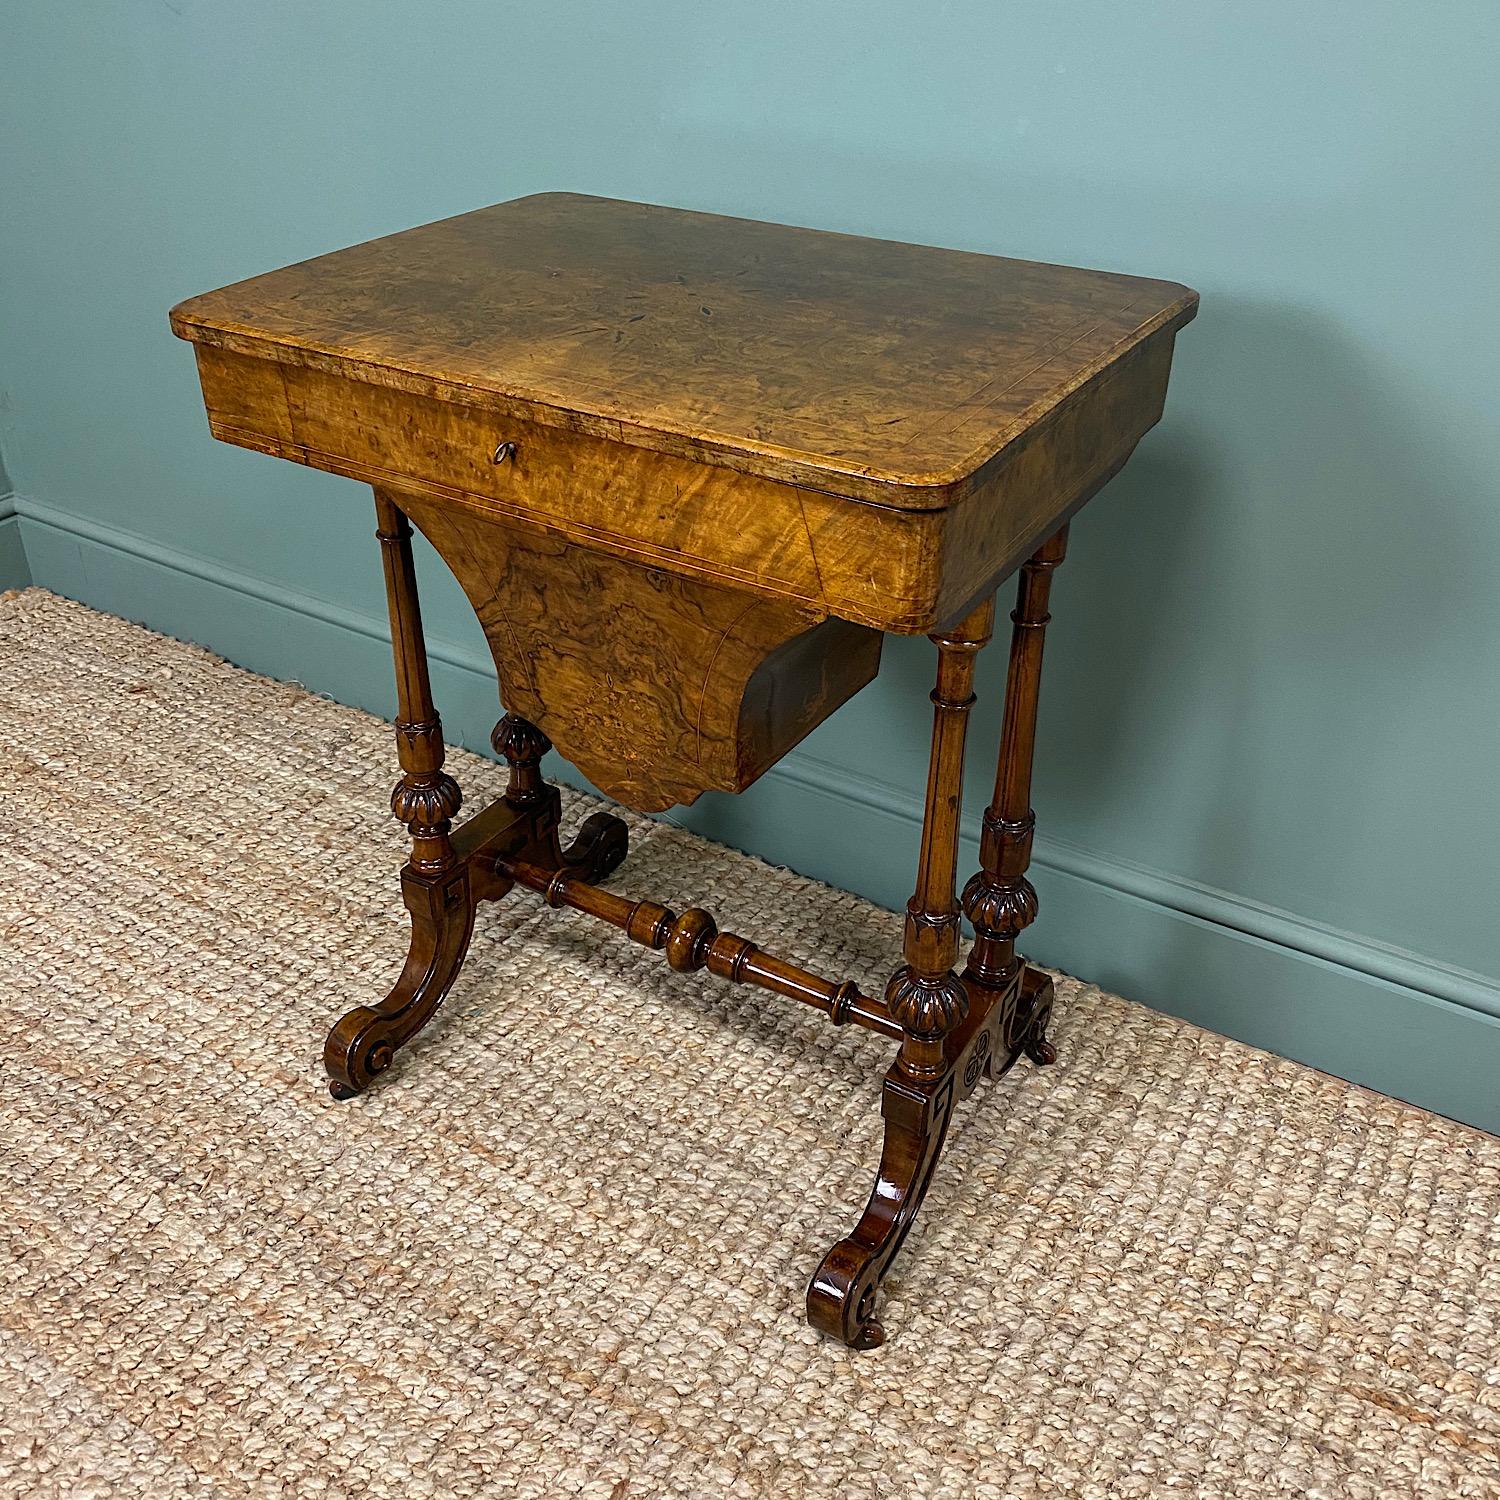 Spectacular Figured Walnut Inlaid Victorian Antique Work Box / Side Table For Sale 3